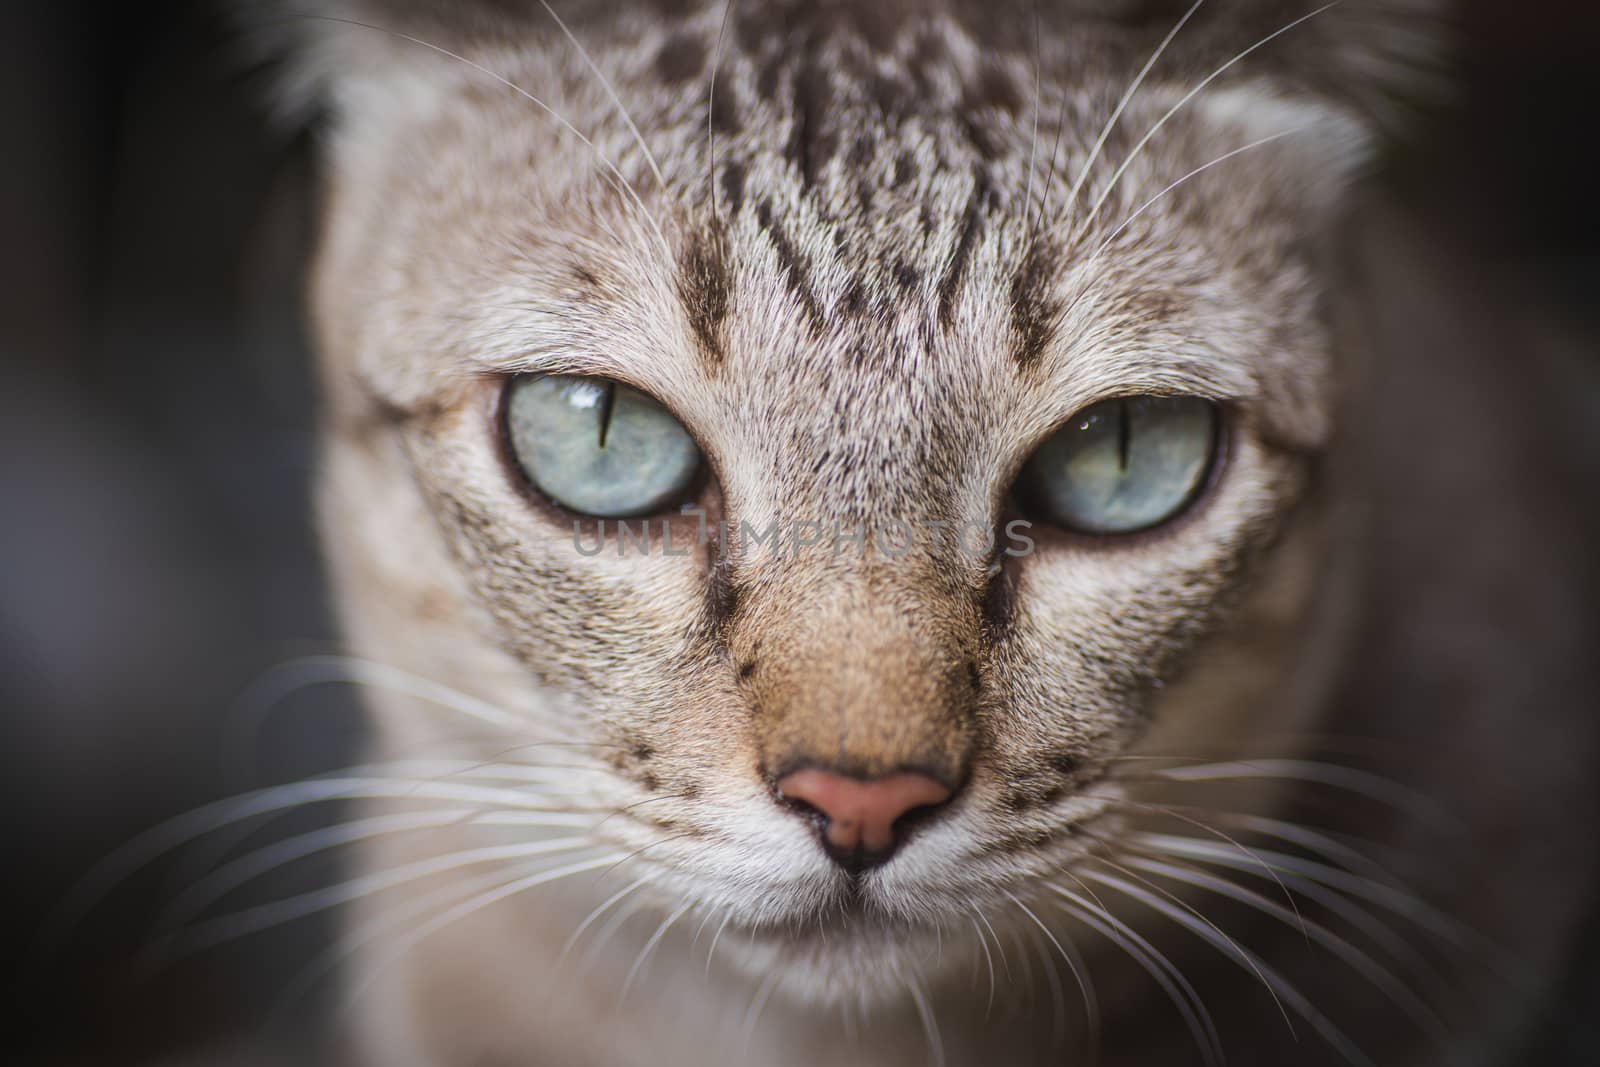 Soft focus Portrait of tabby 
grey cat kitten striped adorable looking something looks fierce close up animal is eyes and nose macro concept.